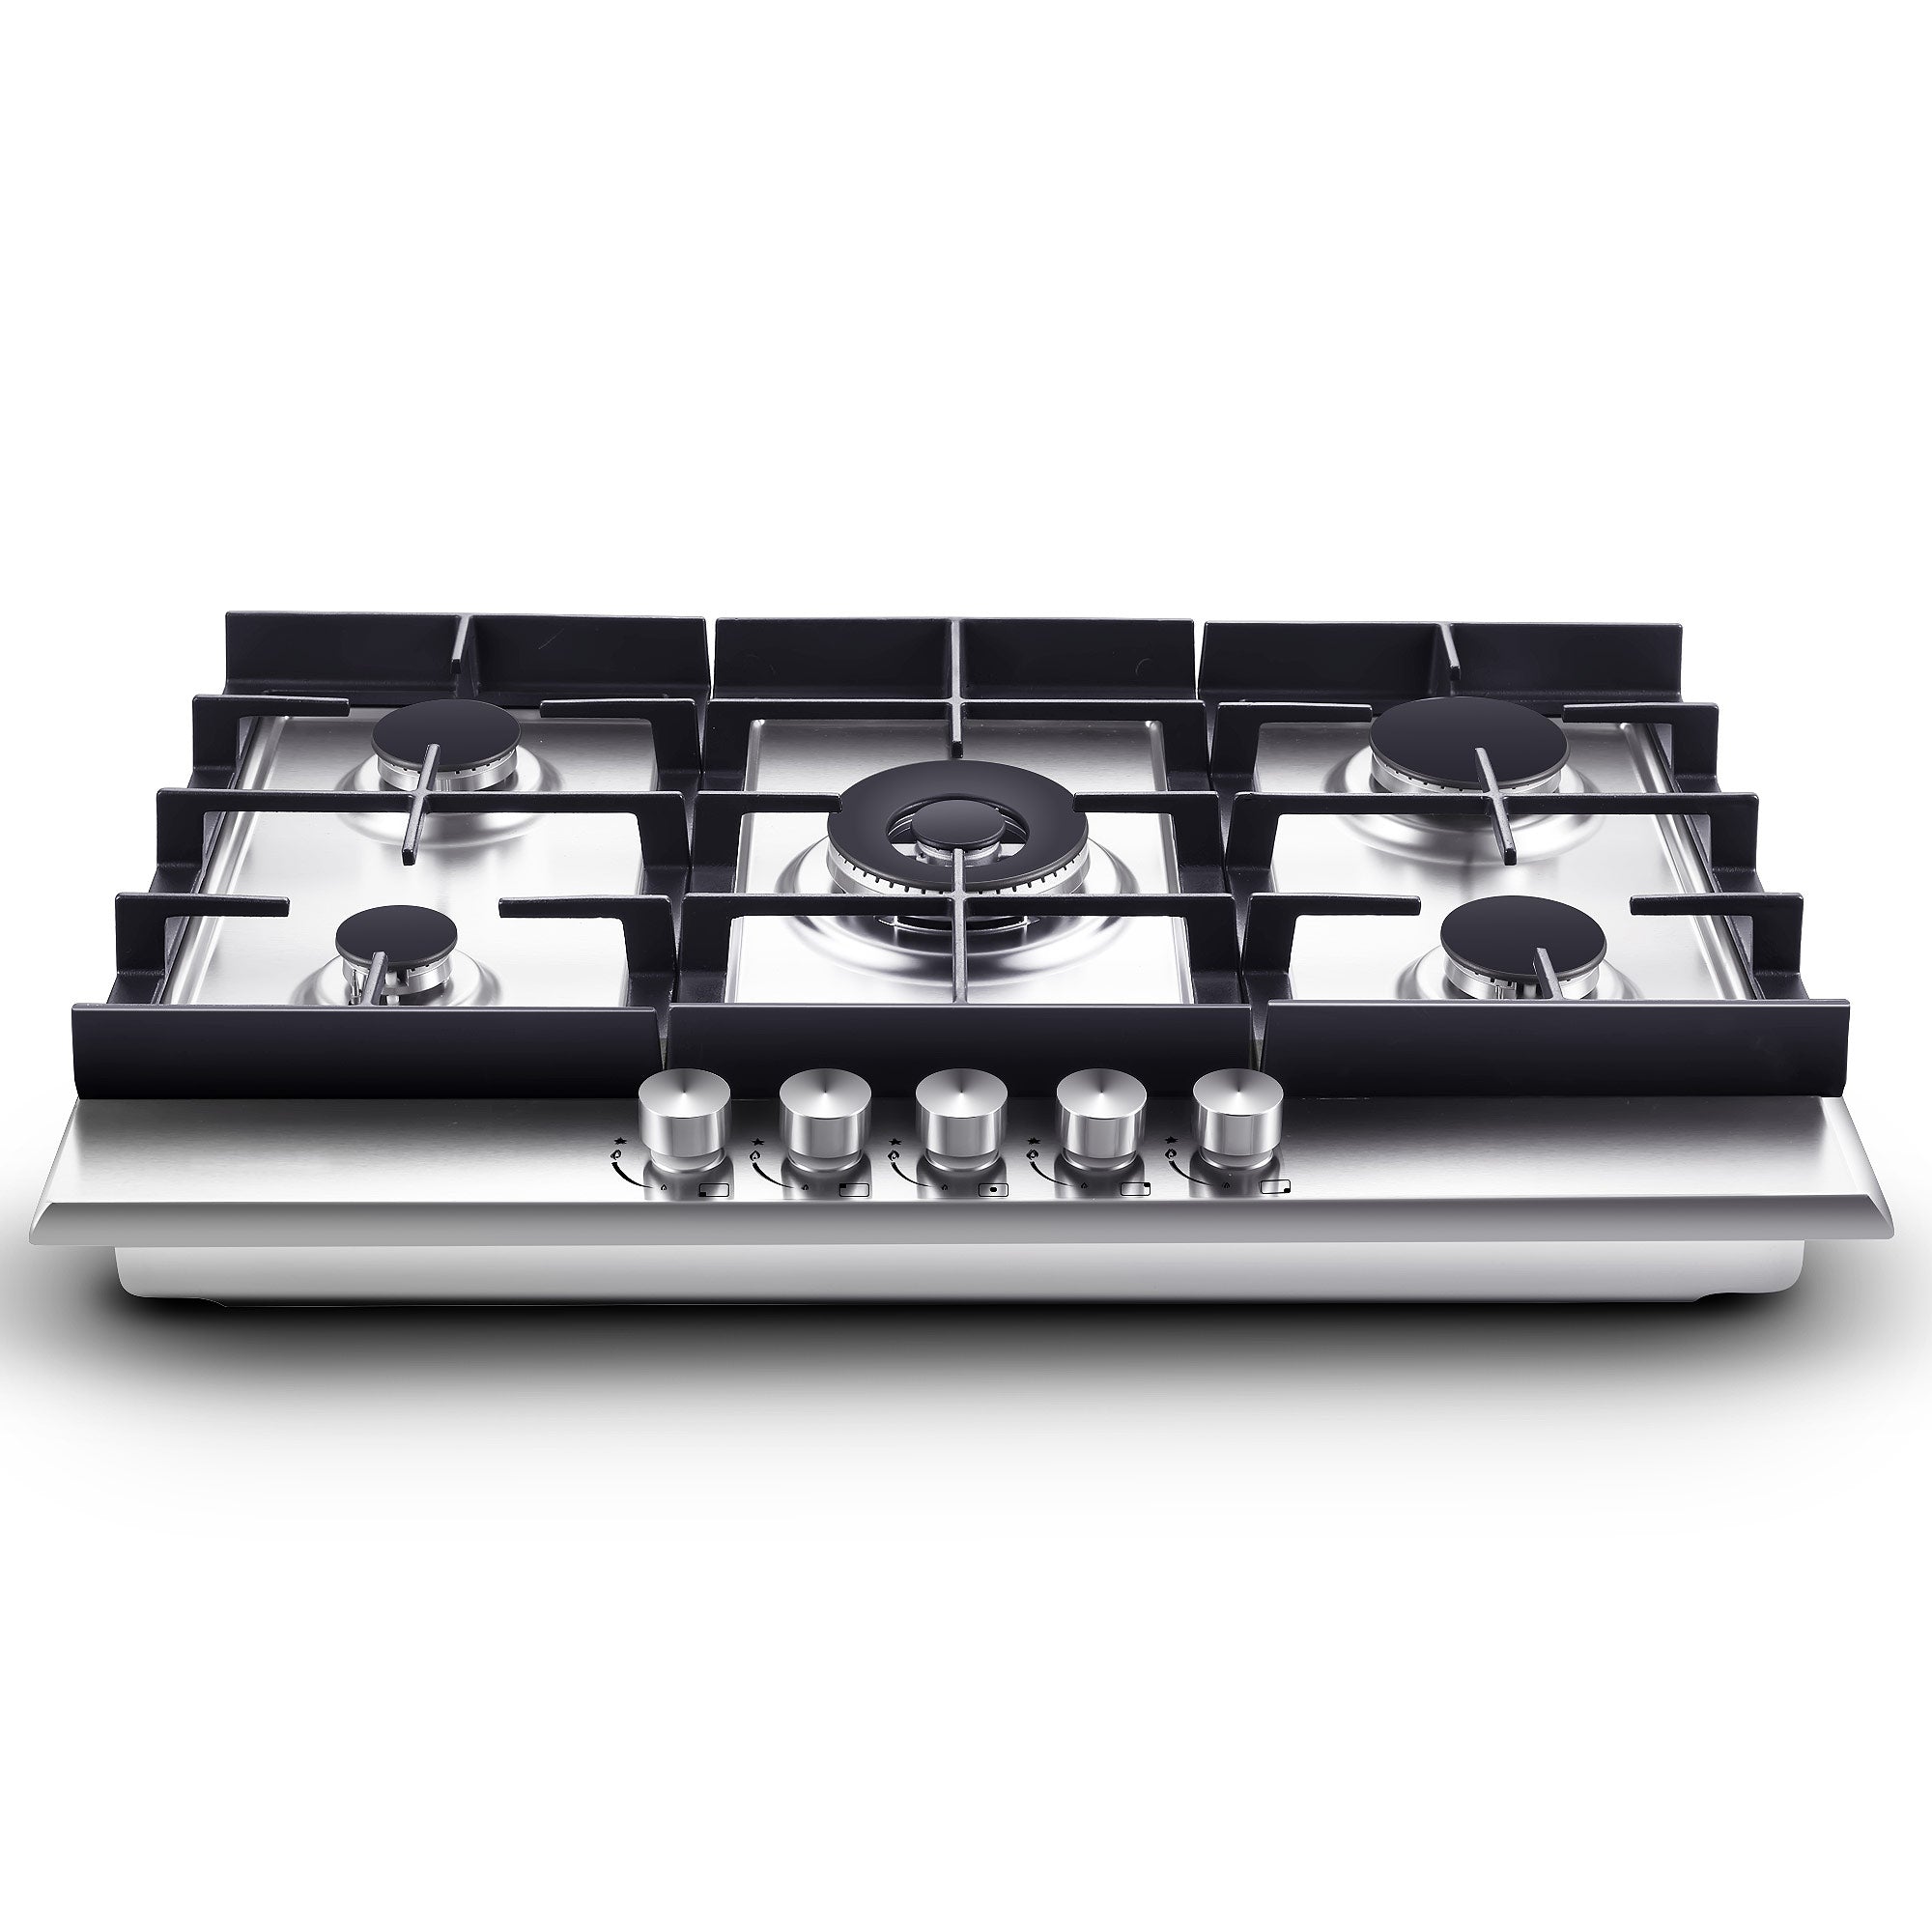 GC002-305S - 30 inch - 5 Burners Built-in Stainless Steel Gas Cooktop